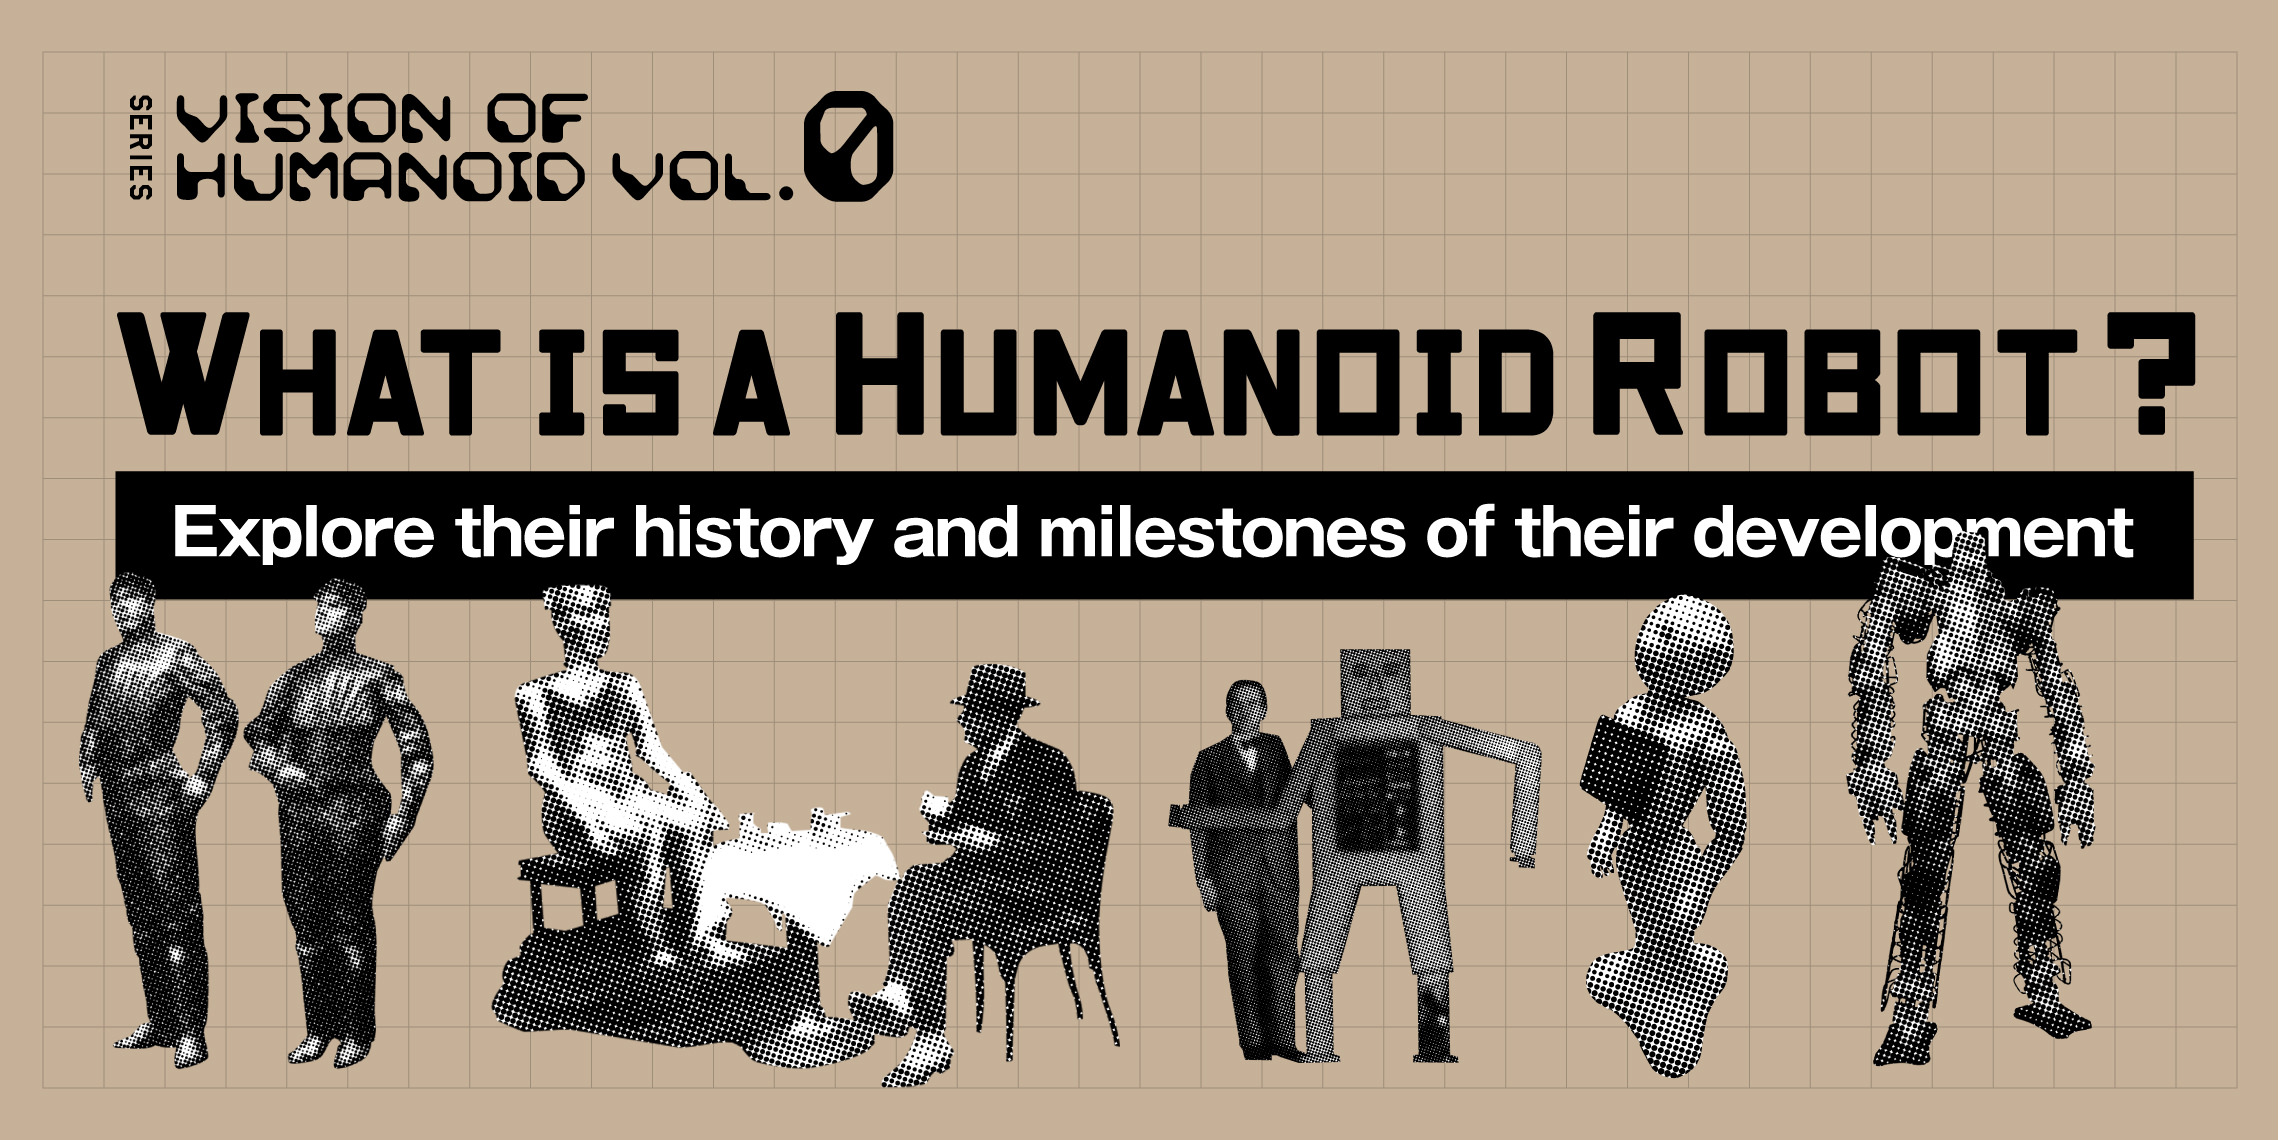 What is a humanoid robot? Explore their history and milestones of their